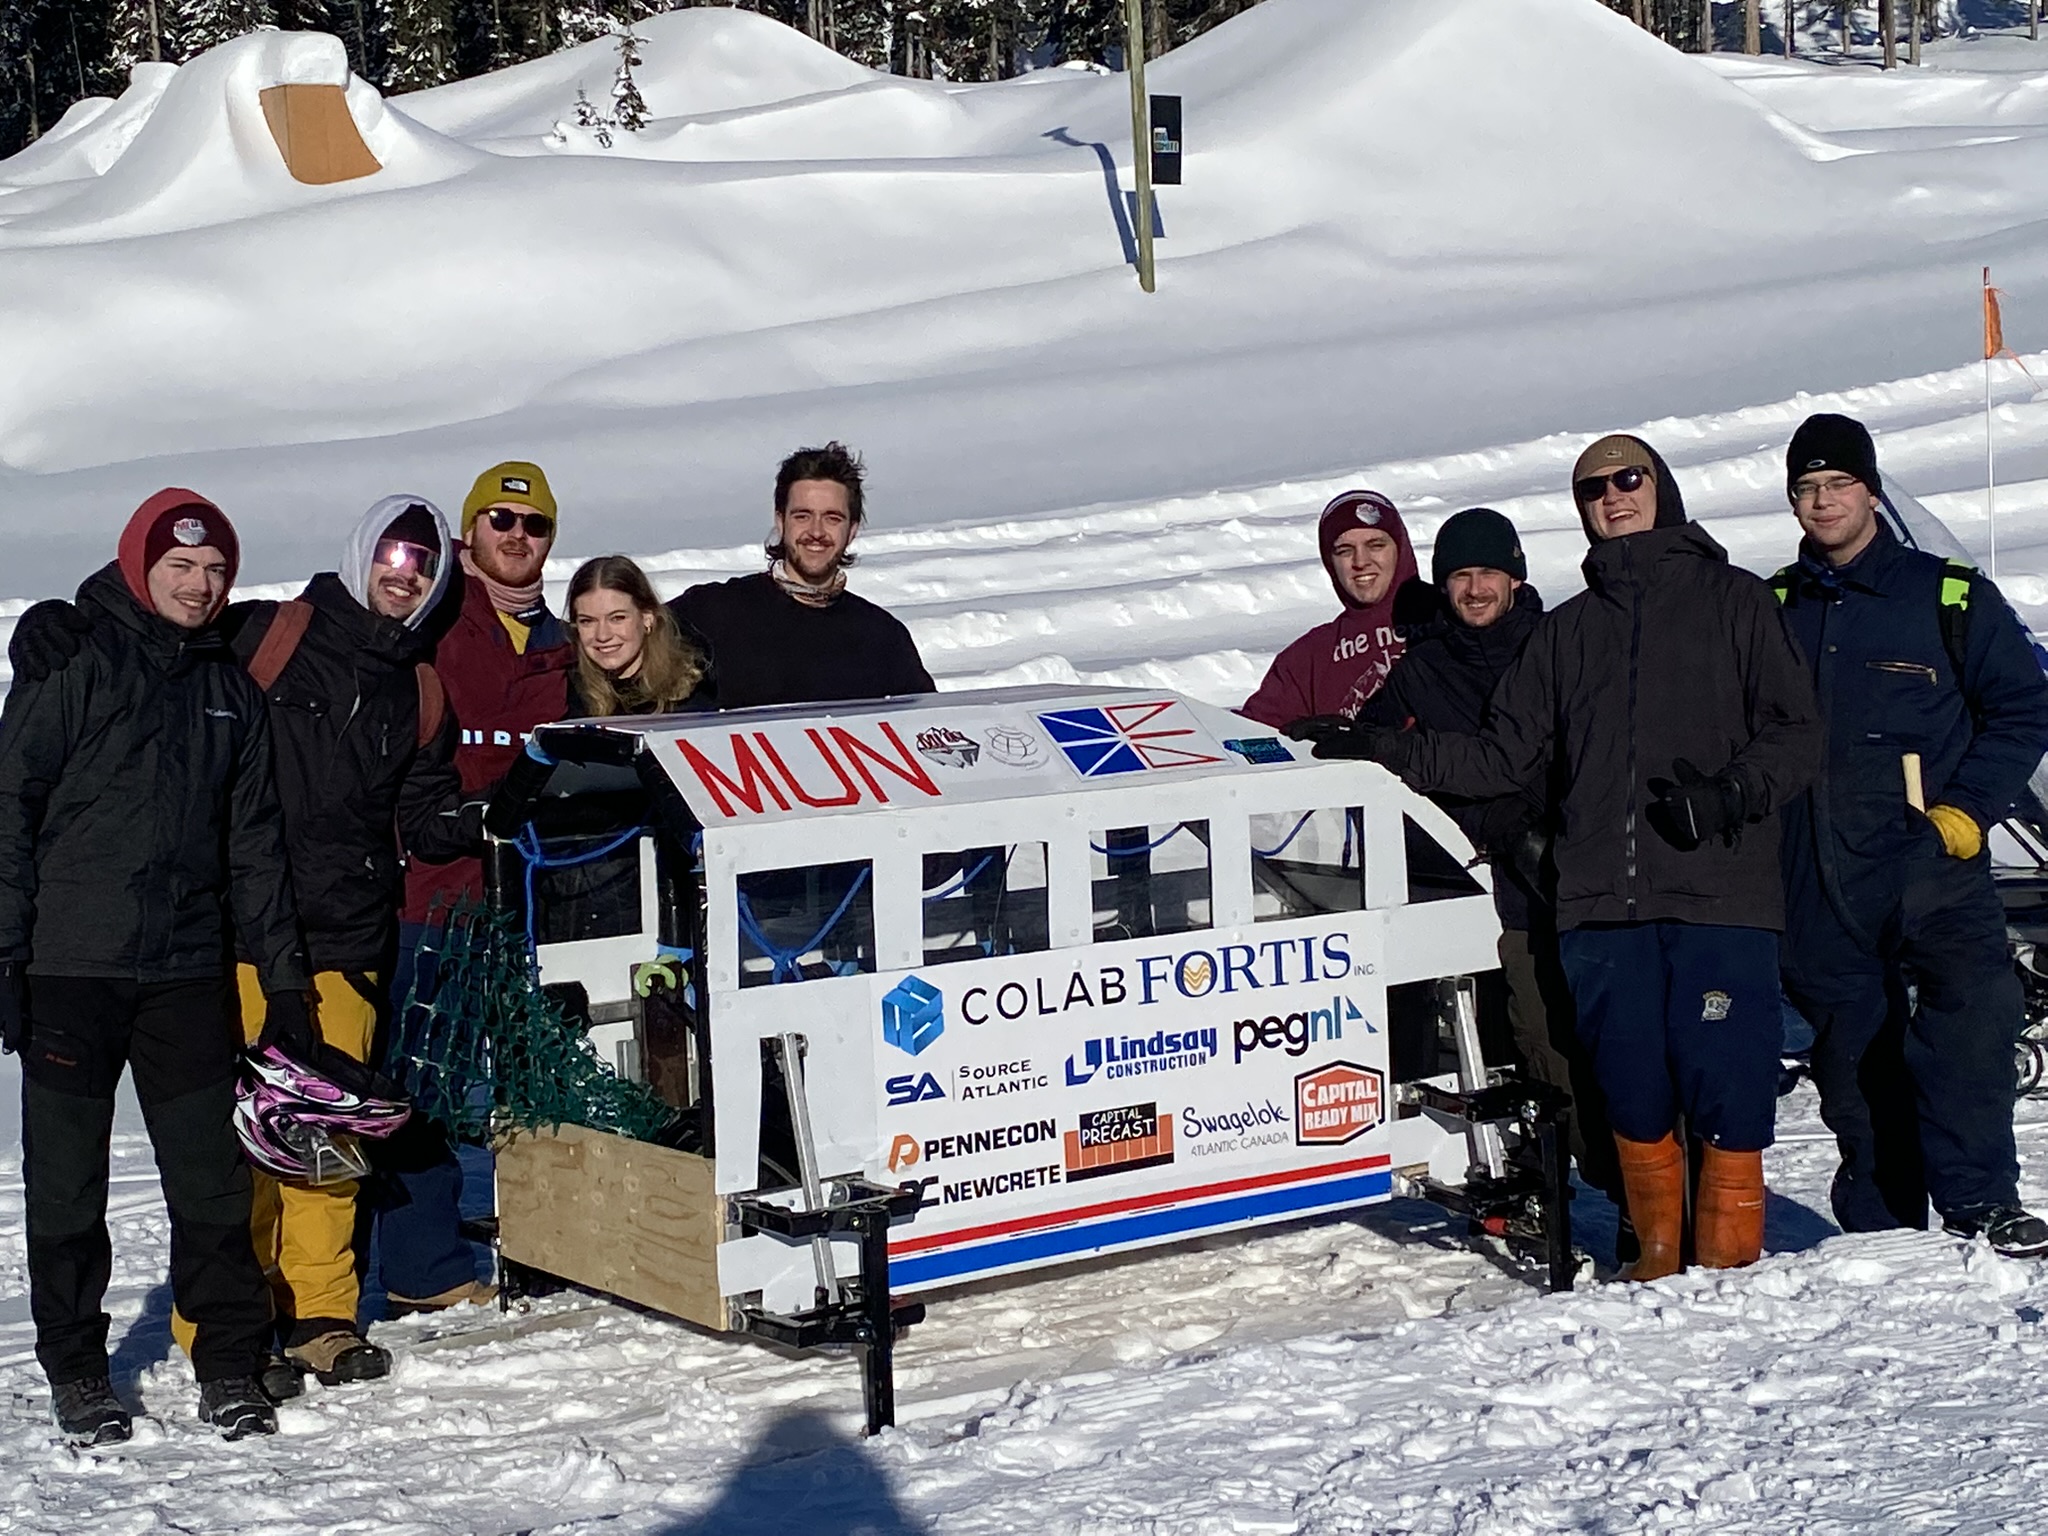 The team from Memorial with their concrete toboggan at the Great Northern Concrete Toboggan Race in Kelowna, B.C.